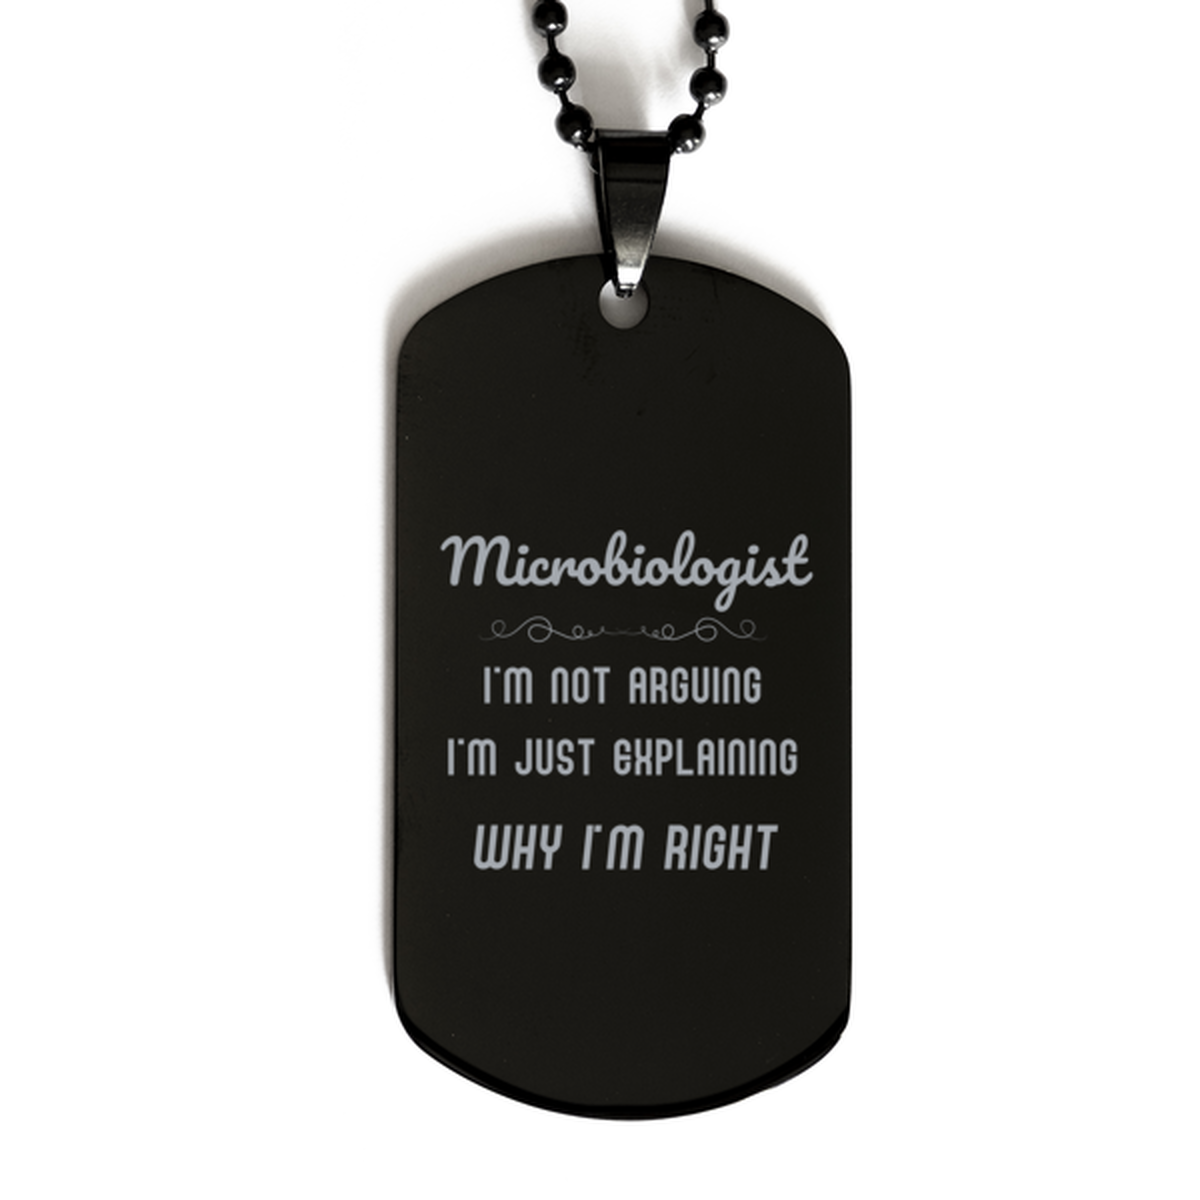 Microbiologist I'm not Arguing. I'm Just Explaining Why I'm RIGHT Black Dog Tag, Funny Saying Quote Microbiologist Gifts For Microbiologist Graduation Birthday Christmas Gifts for Men Women Coworker